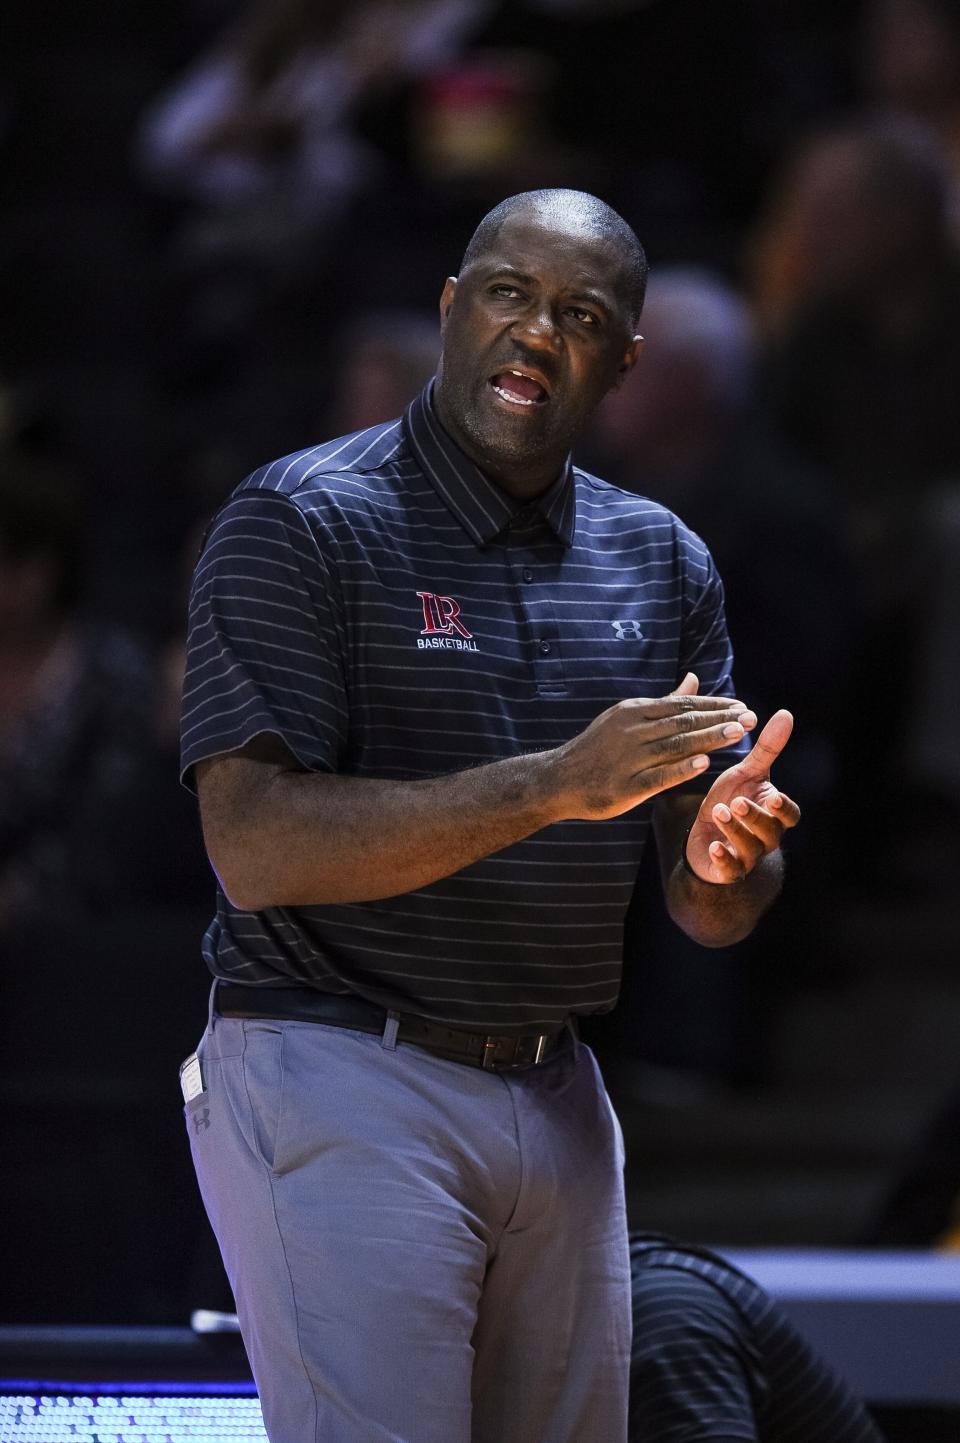 Lenoir-Rhyne Bears head coach Everick Sullivan coaching during the first half against the Tennessee Volunteers at Thompson-Boiling Arena in Knoxville, TN on Oct 30, 2021.